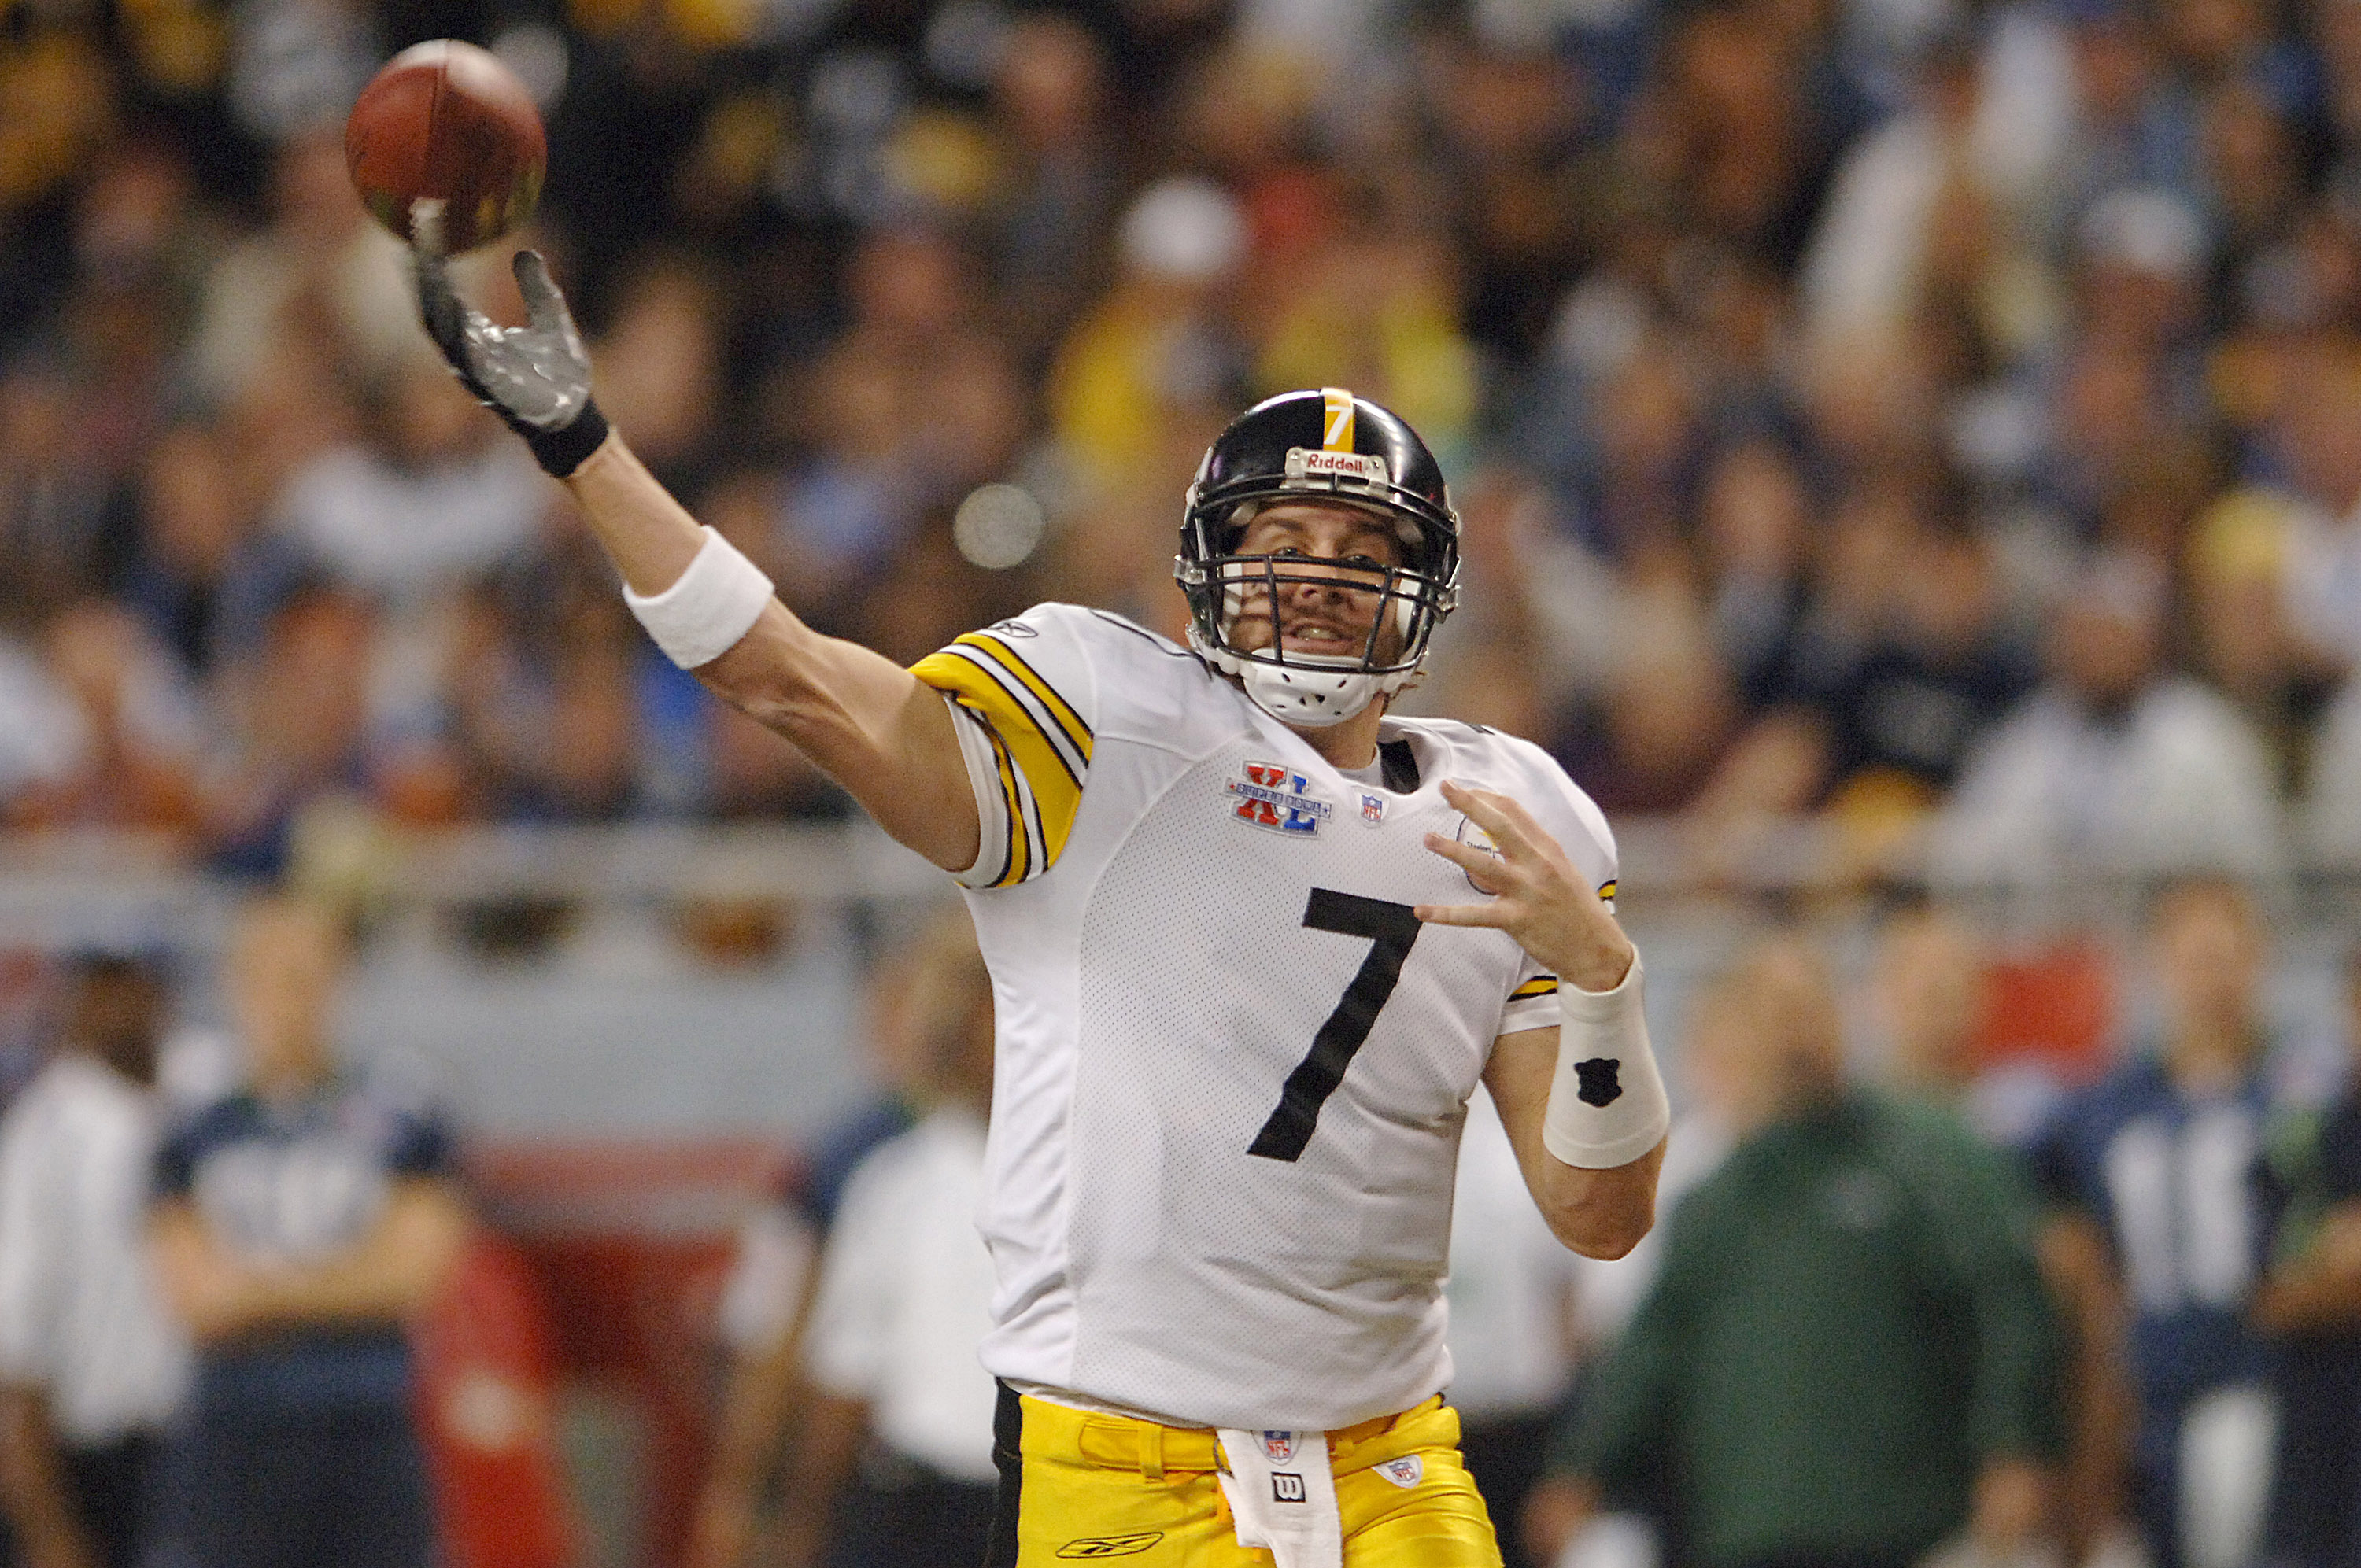 How Many Championship Rings Does Ben Roethlisberger Have?